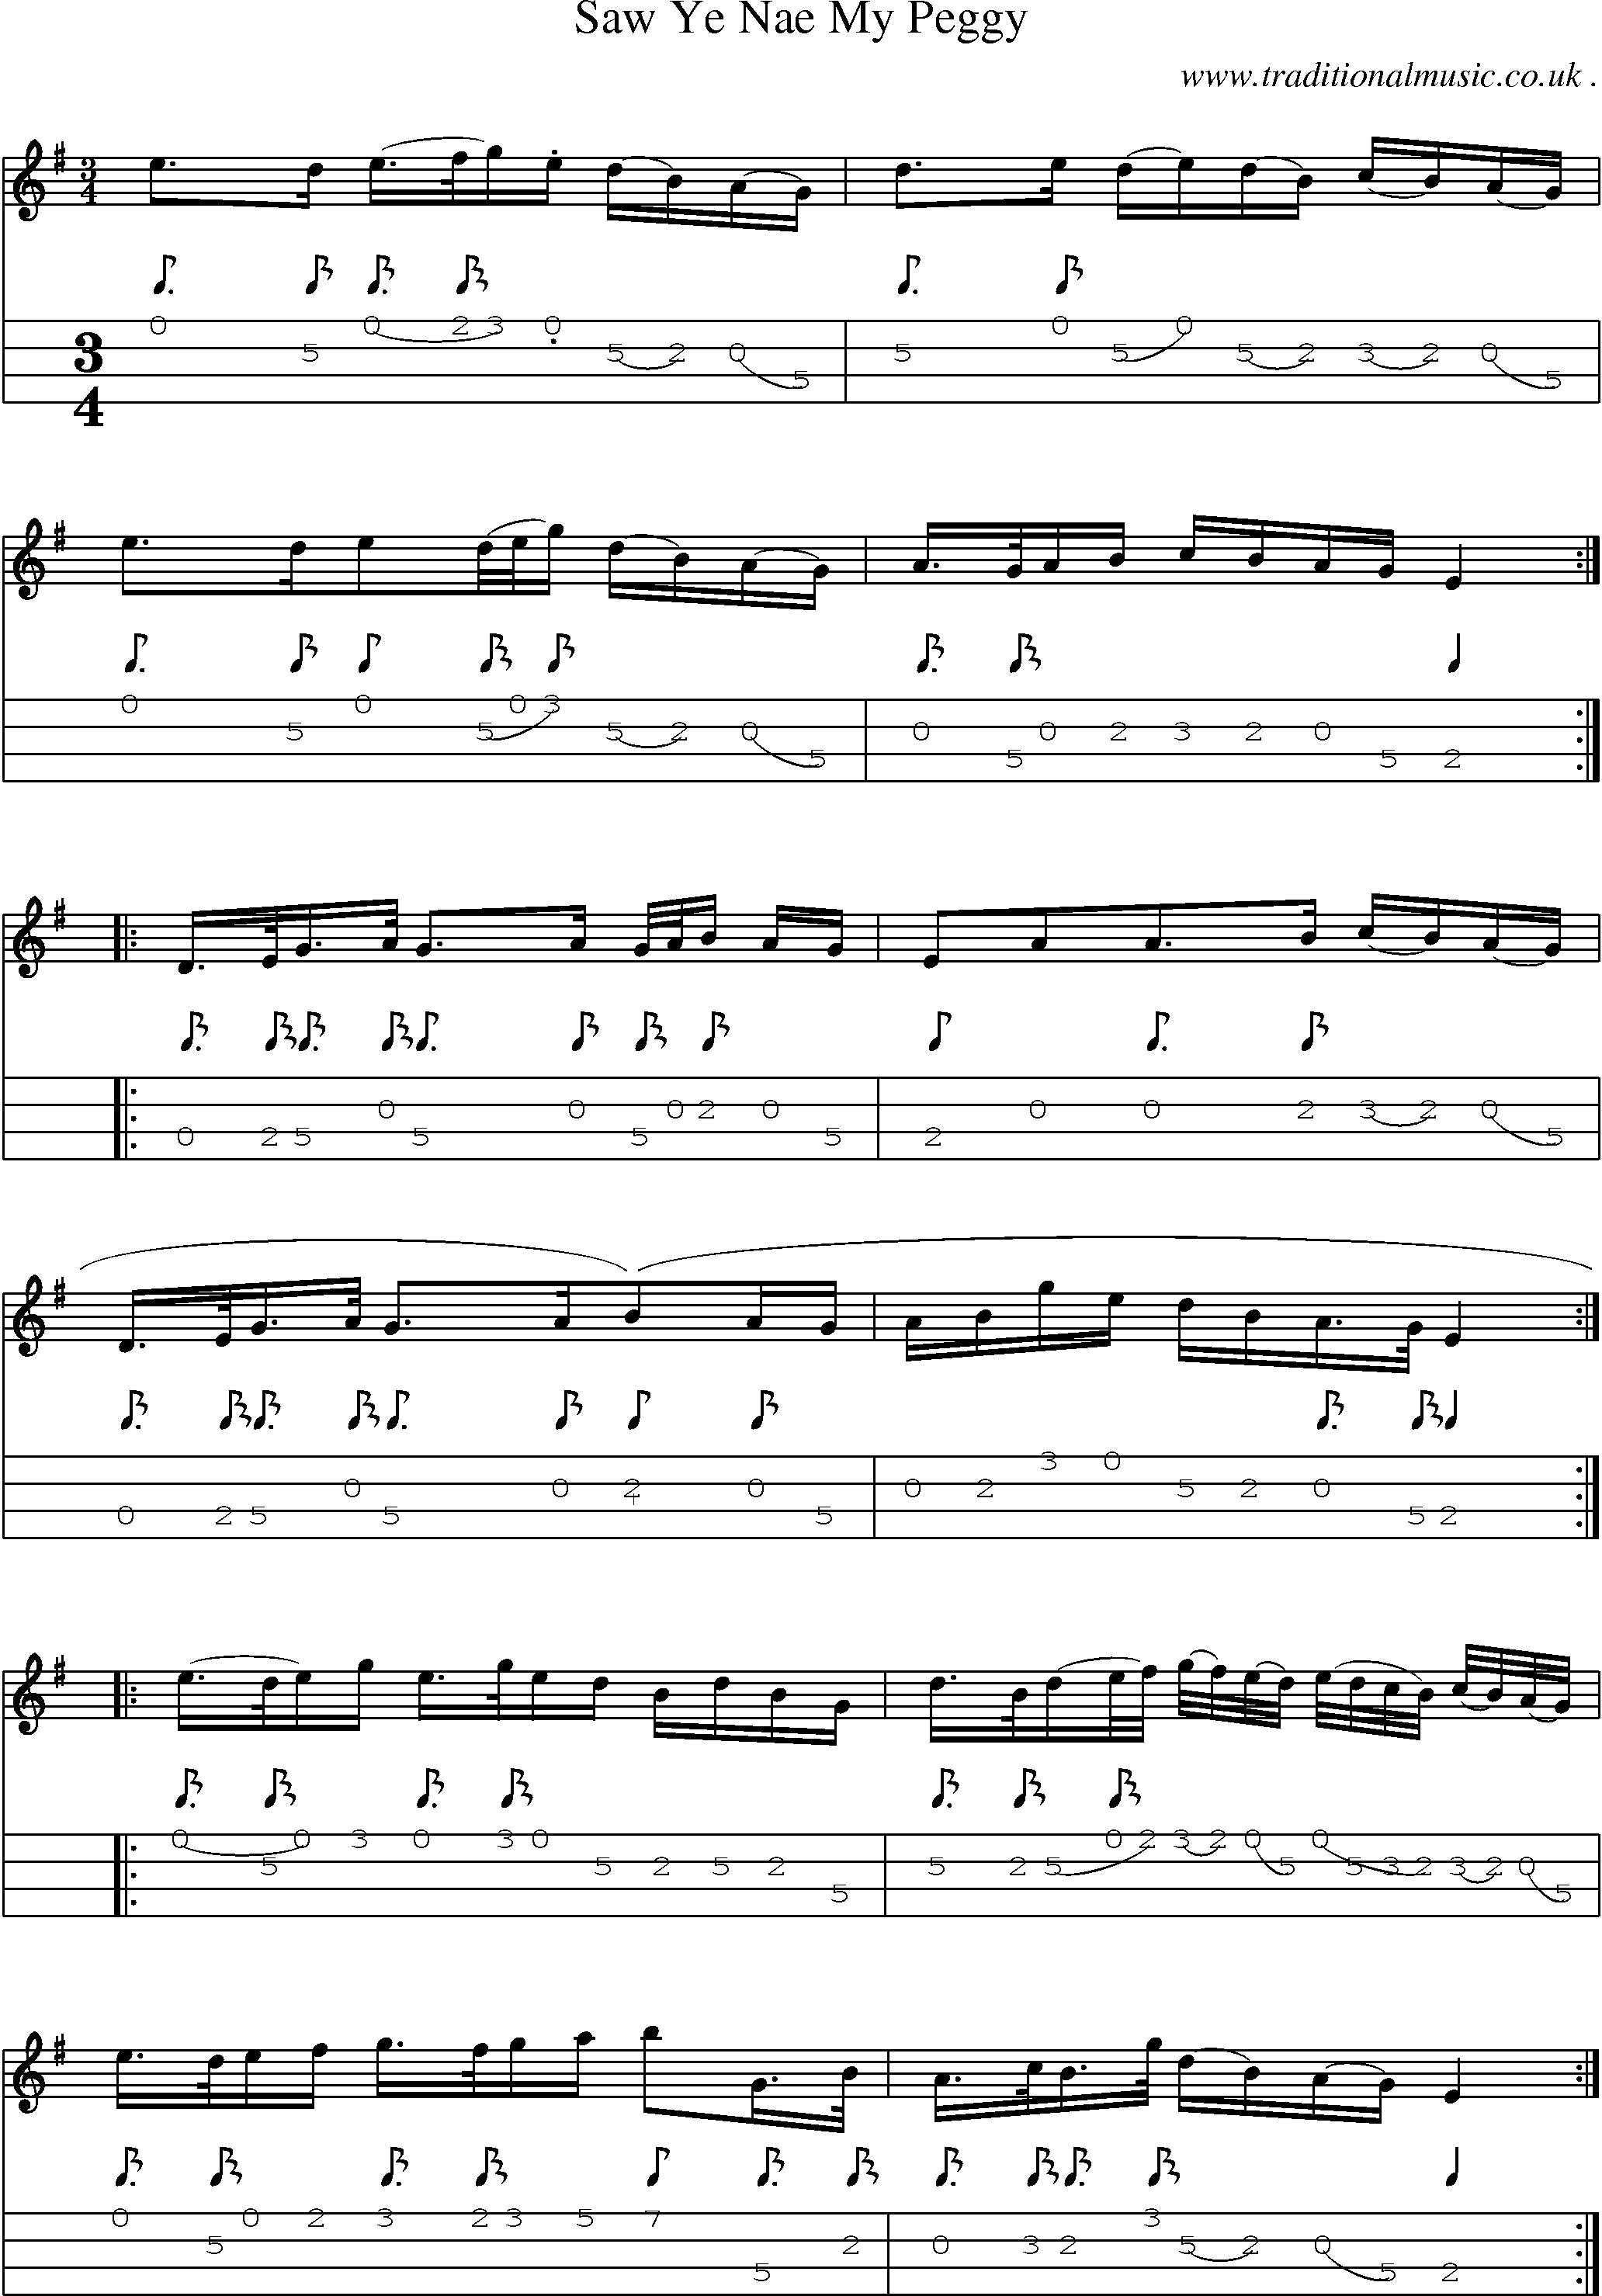 Sheet-Music and Mandolin Tabs for Saw Ye Nae My Peggy